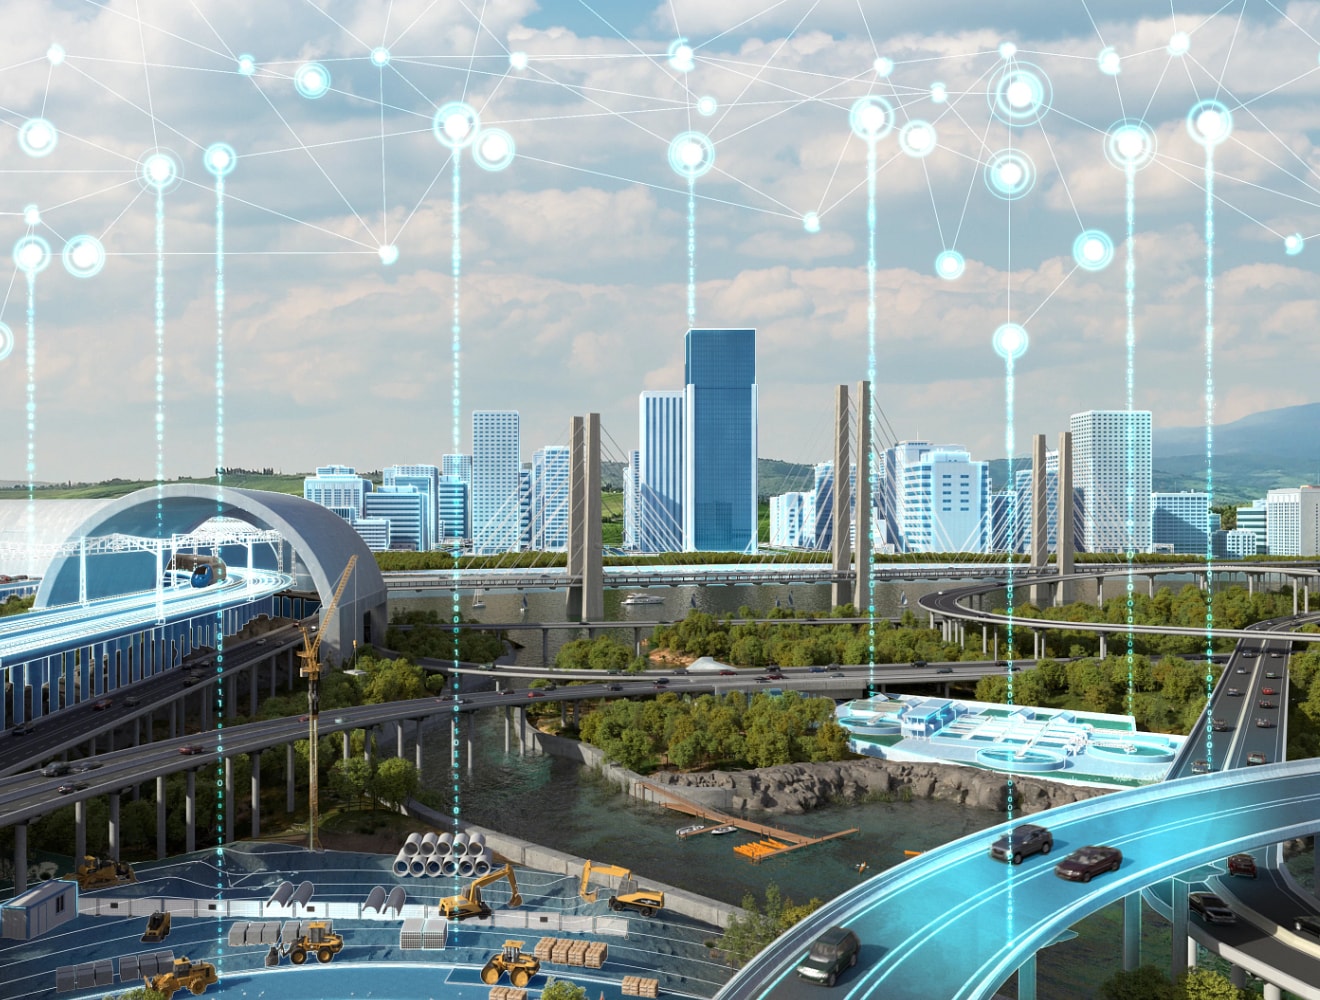 Cityscape rendering showing digital transformation and connected data